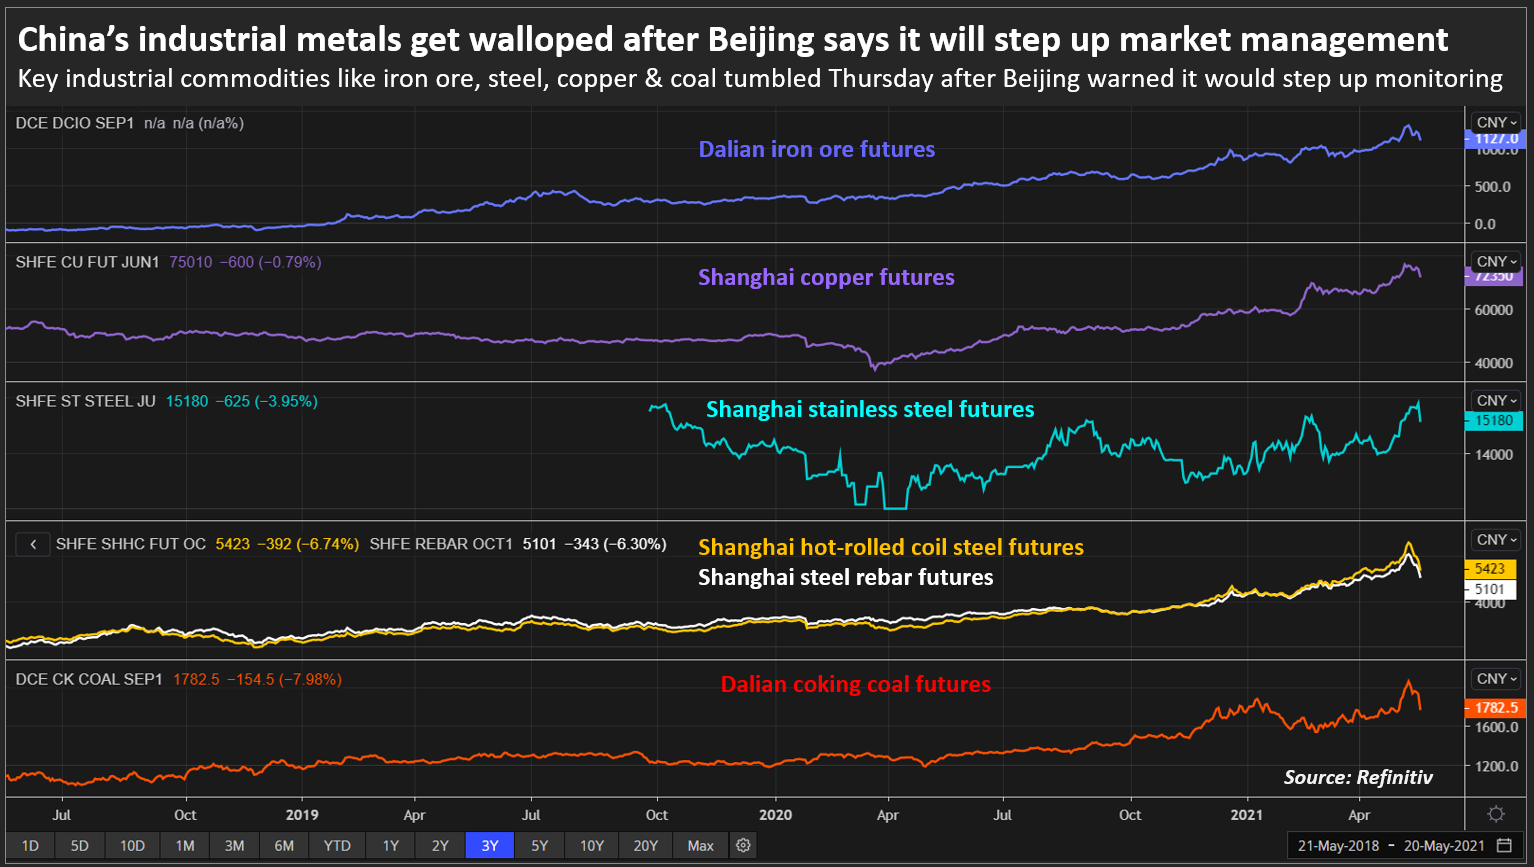 China’s industrial metals get walloped after Beijing says it will step up market management